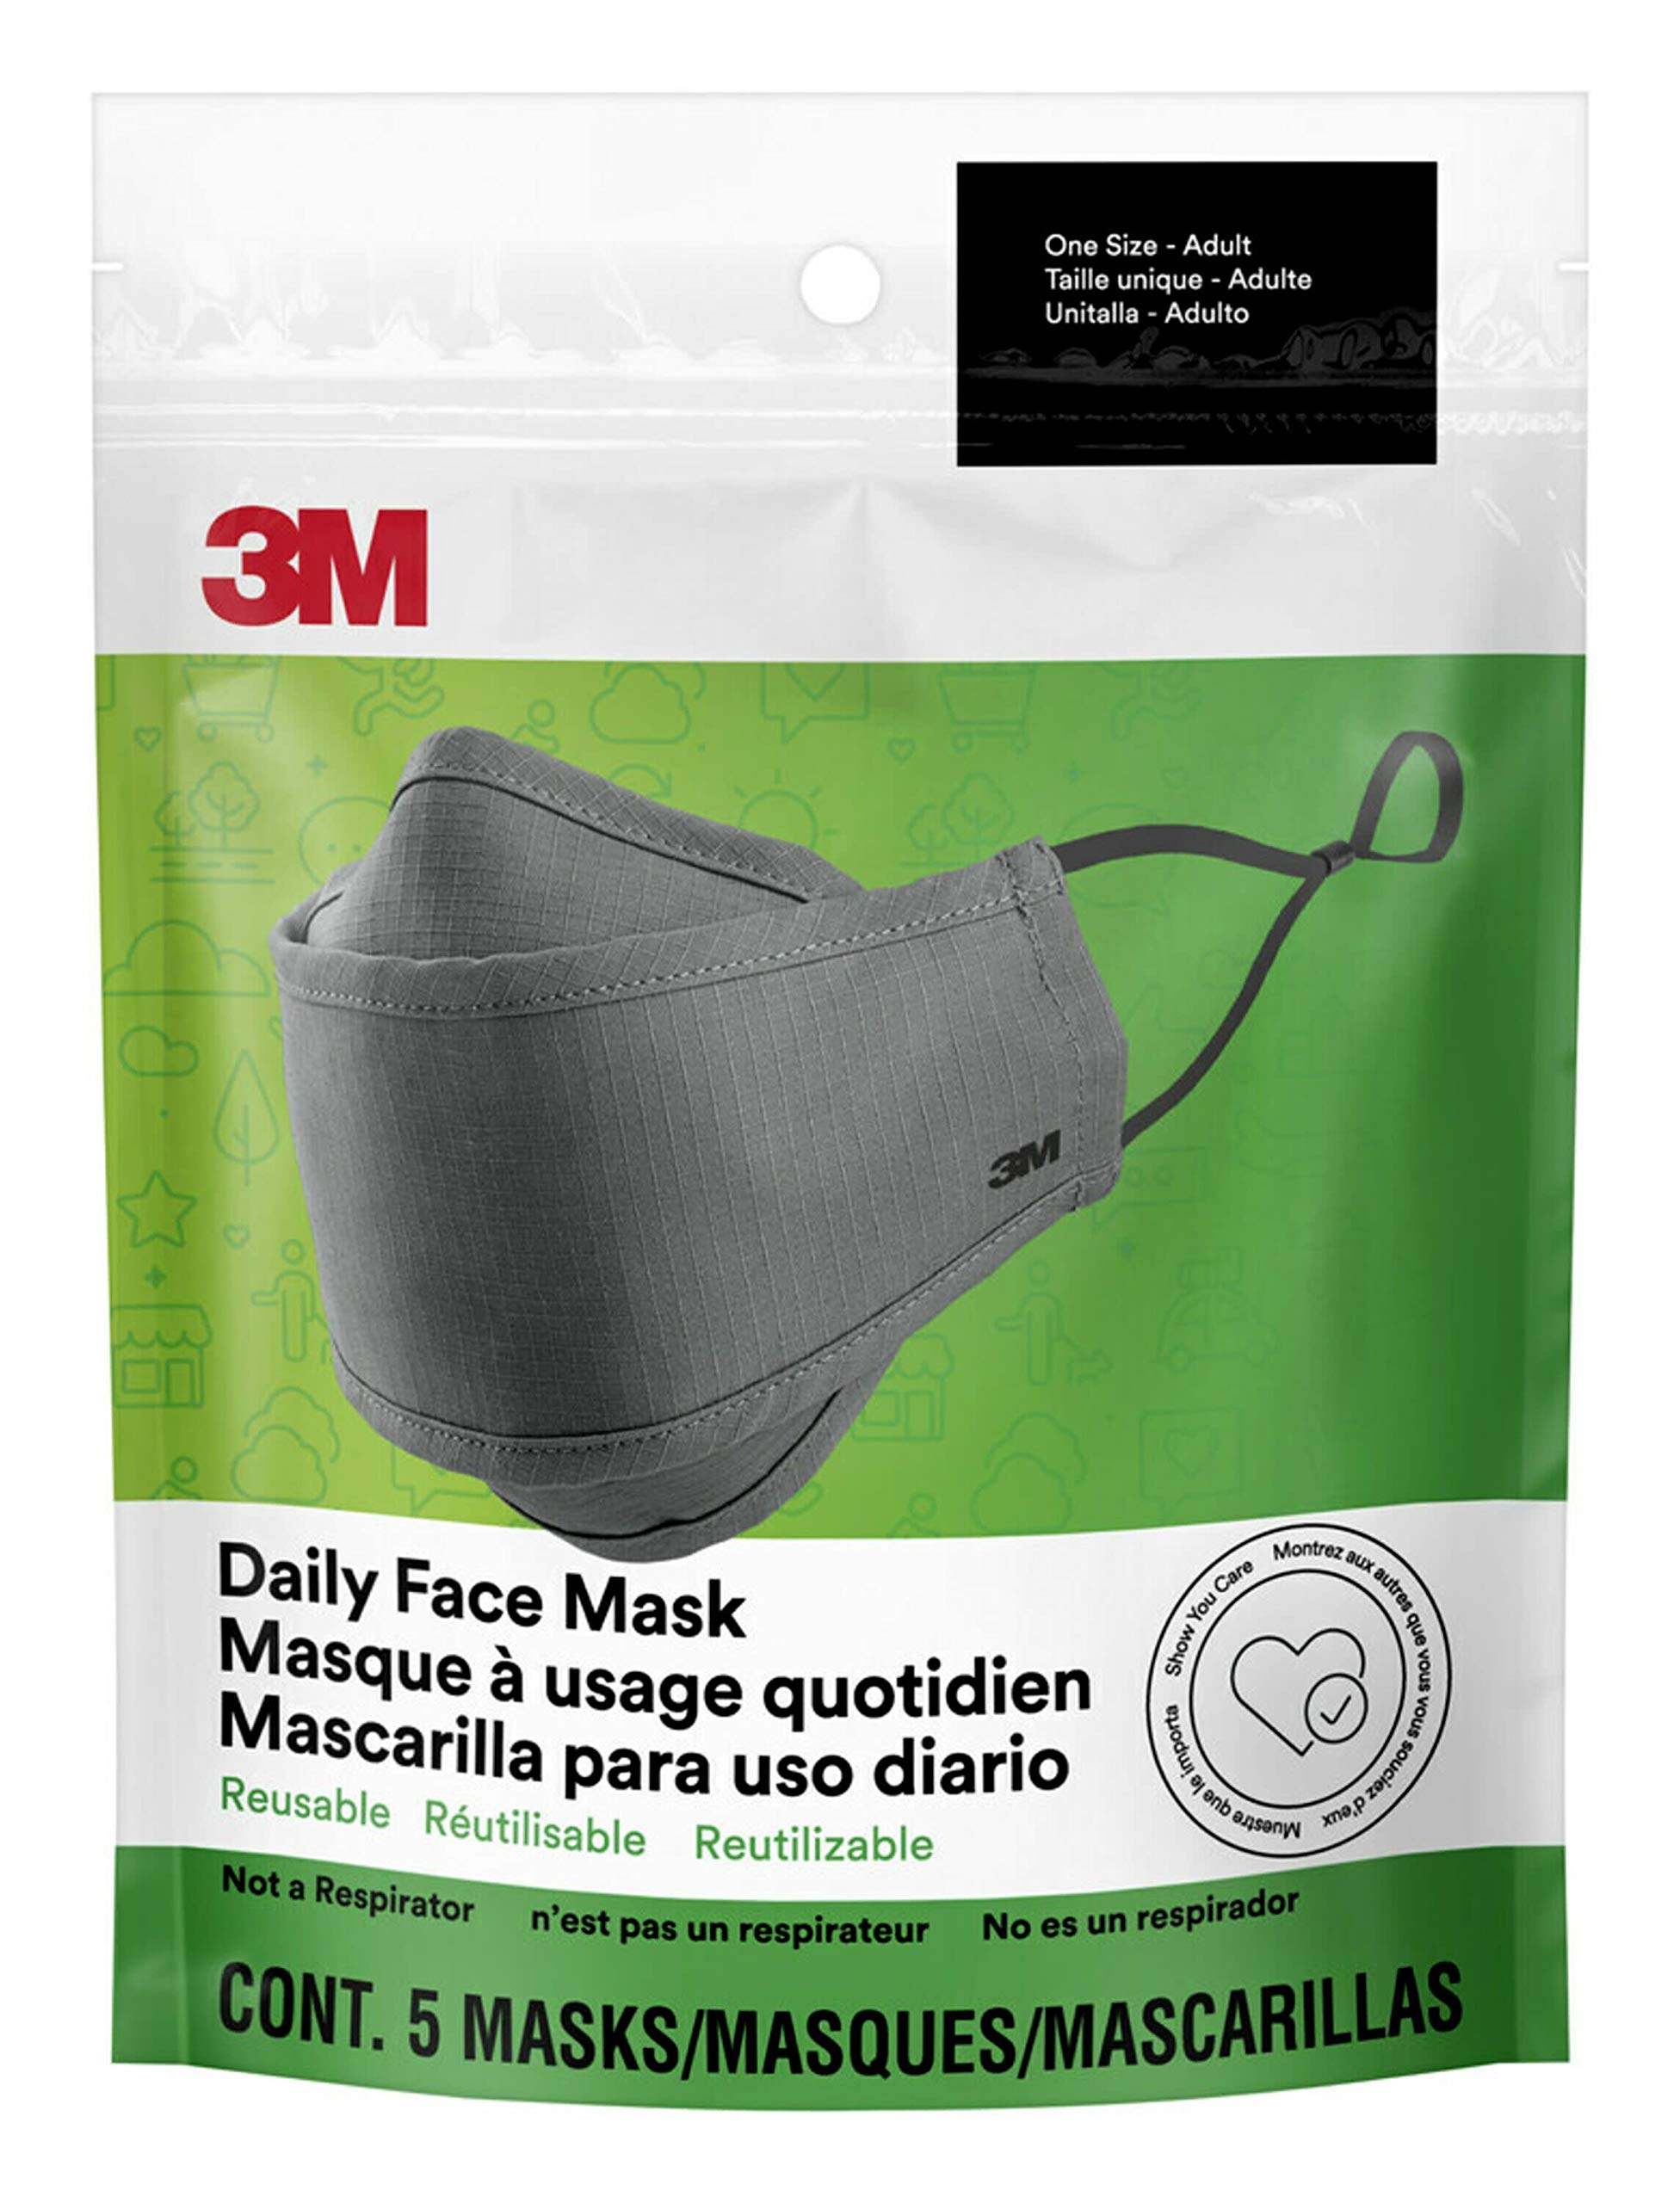 3M Daily Face Mask, Reusable, Washable, Adjustable Ear Loops, Lightweight Cotton Fabric, 5 Pack, Gray